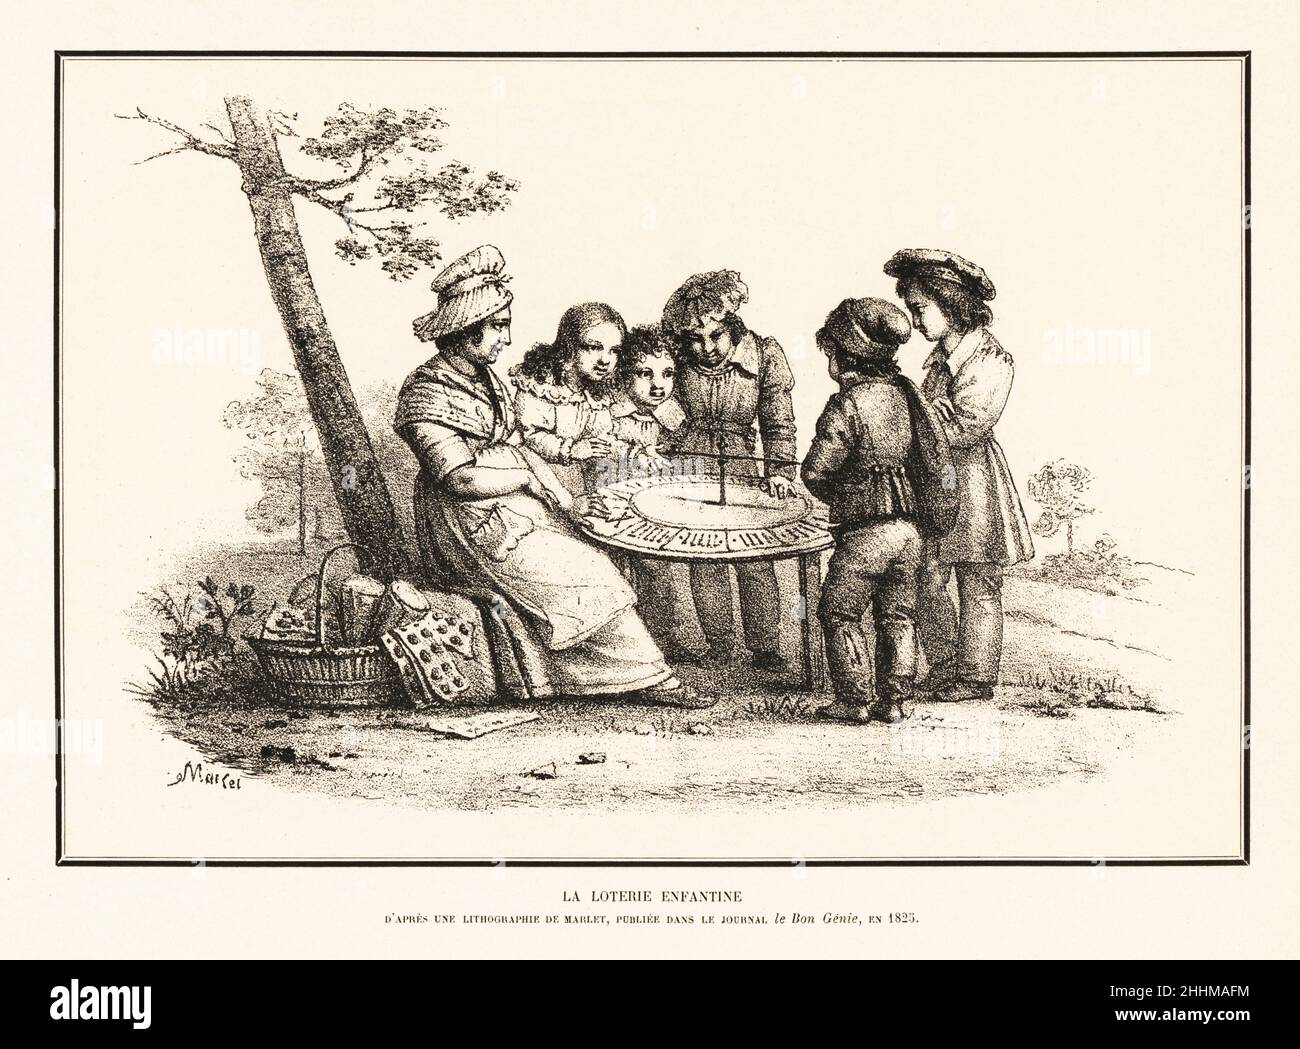 French children playing a wheel of fortune, 1825. A woman vendor holds the table while the children spin the arrow. La Loterie Enfantine, apres une lithographie par Jean-Henri Marlet, Le Bon Genie. Lithograph from Henry Rene d’Allemagne’s Recreations et Passe-Temps, Games and Pastimes, Hachette, Paris, 1906. Stock Photo